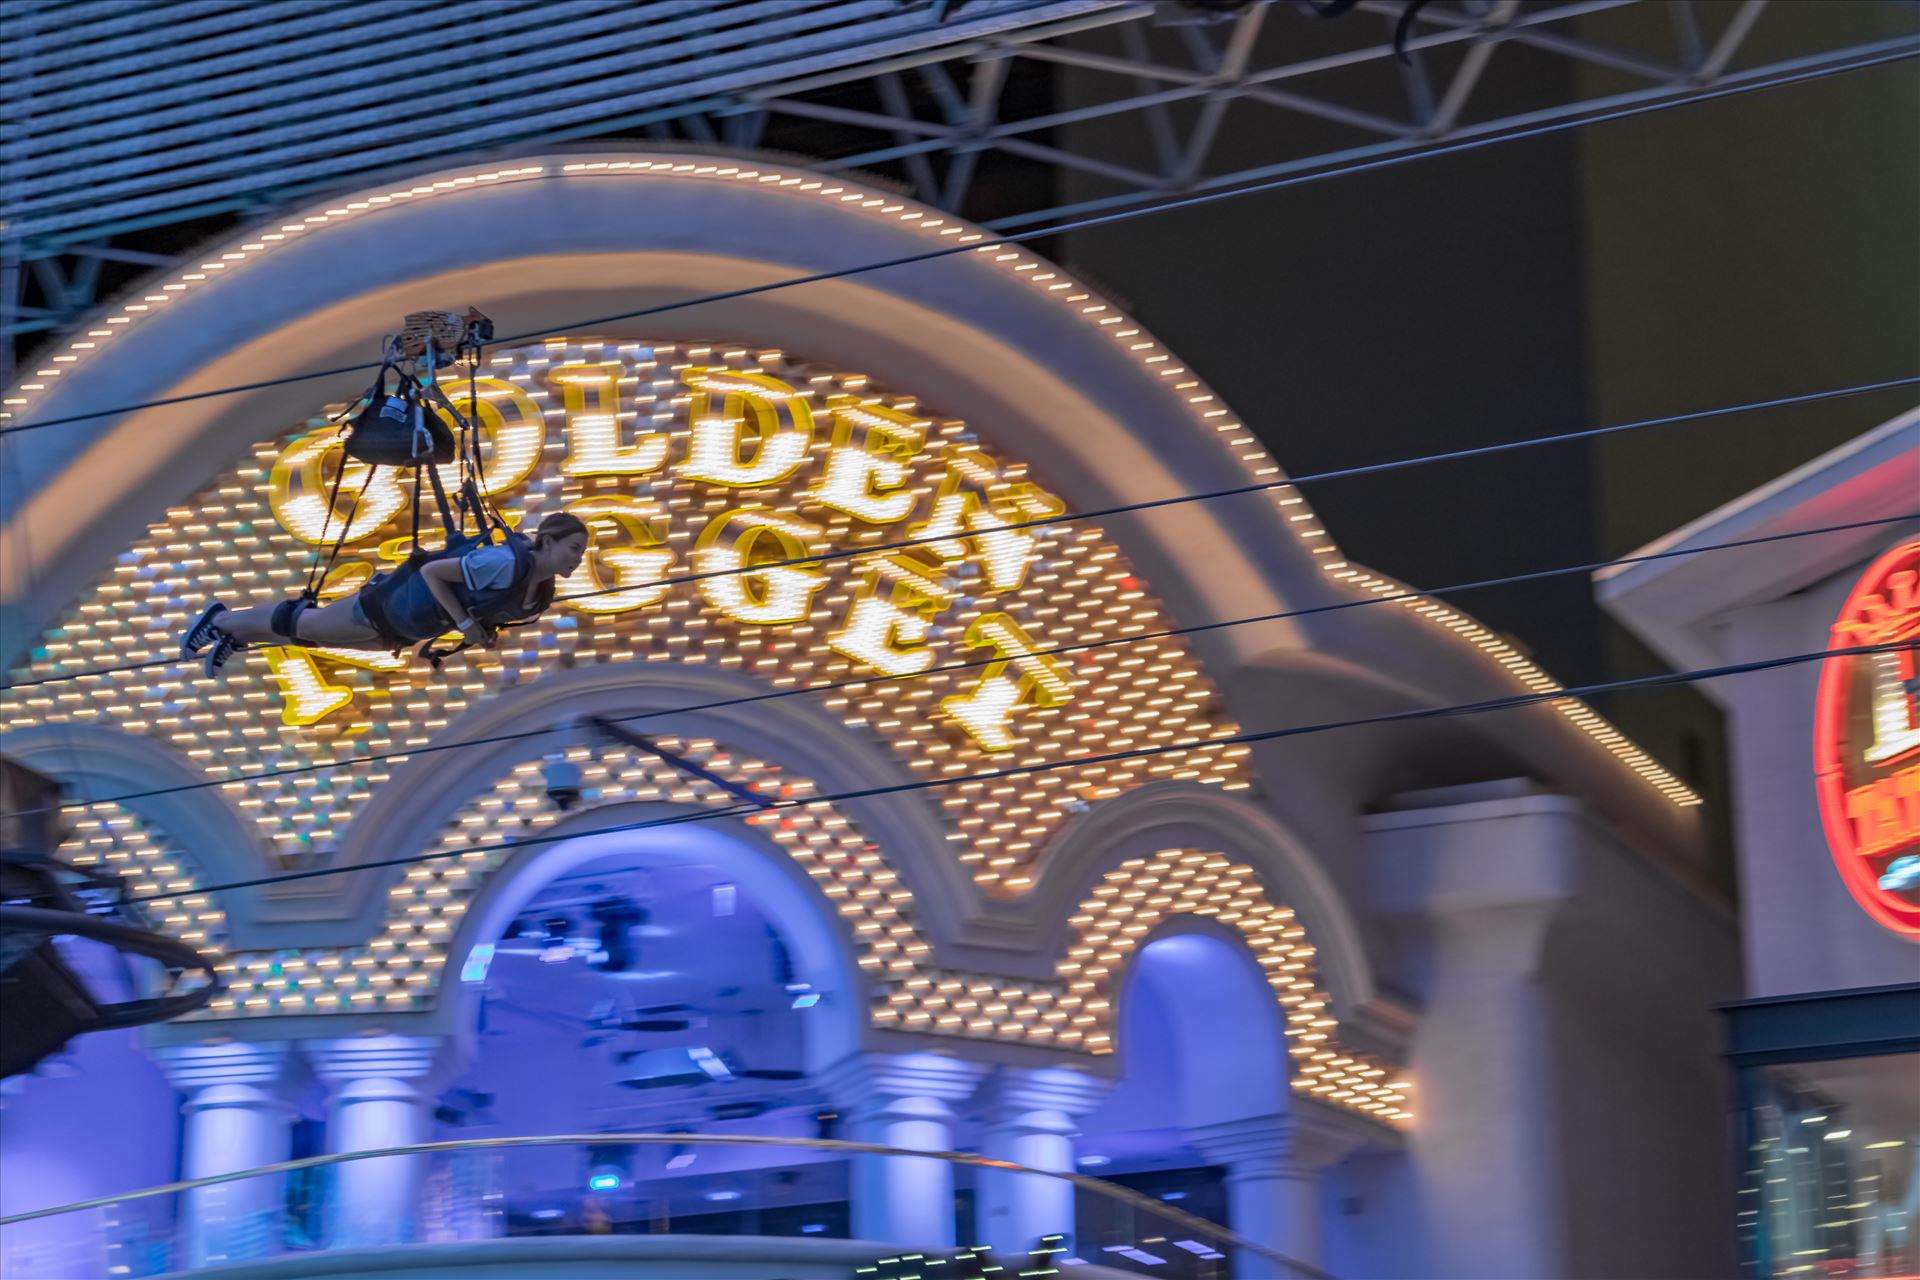 Fremont Street Experence zipline-8502648.jpg  by Terry Kelly Photography